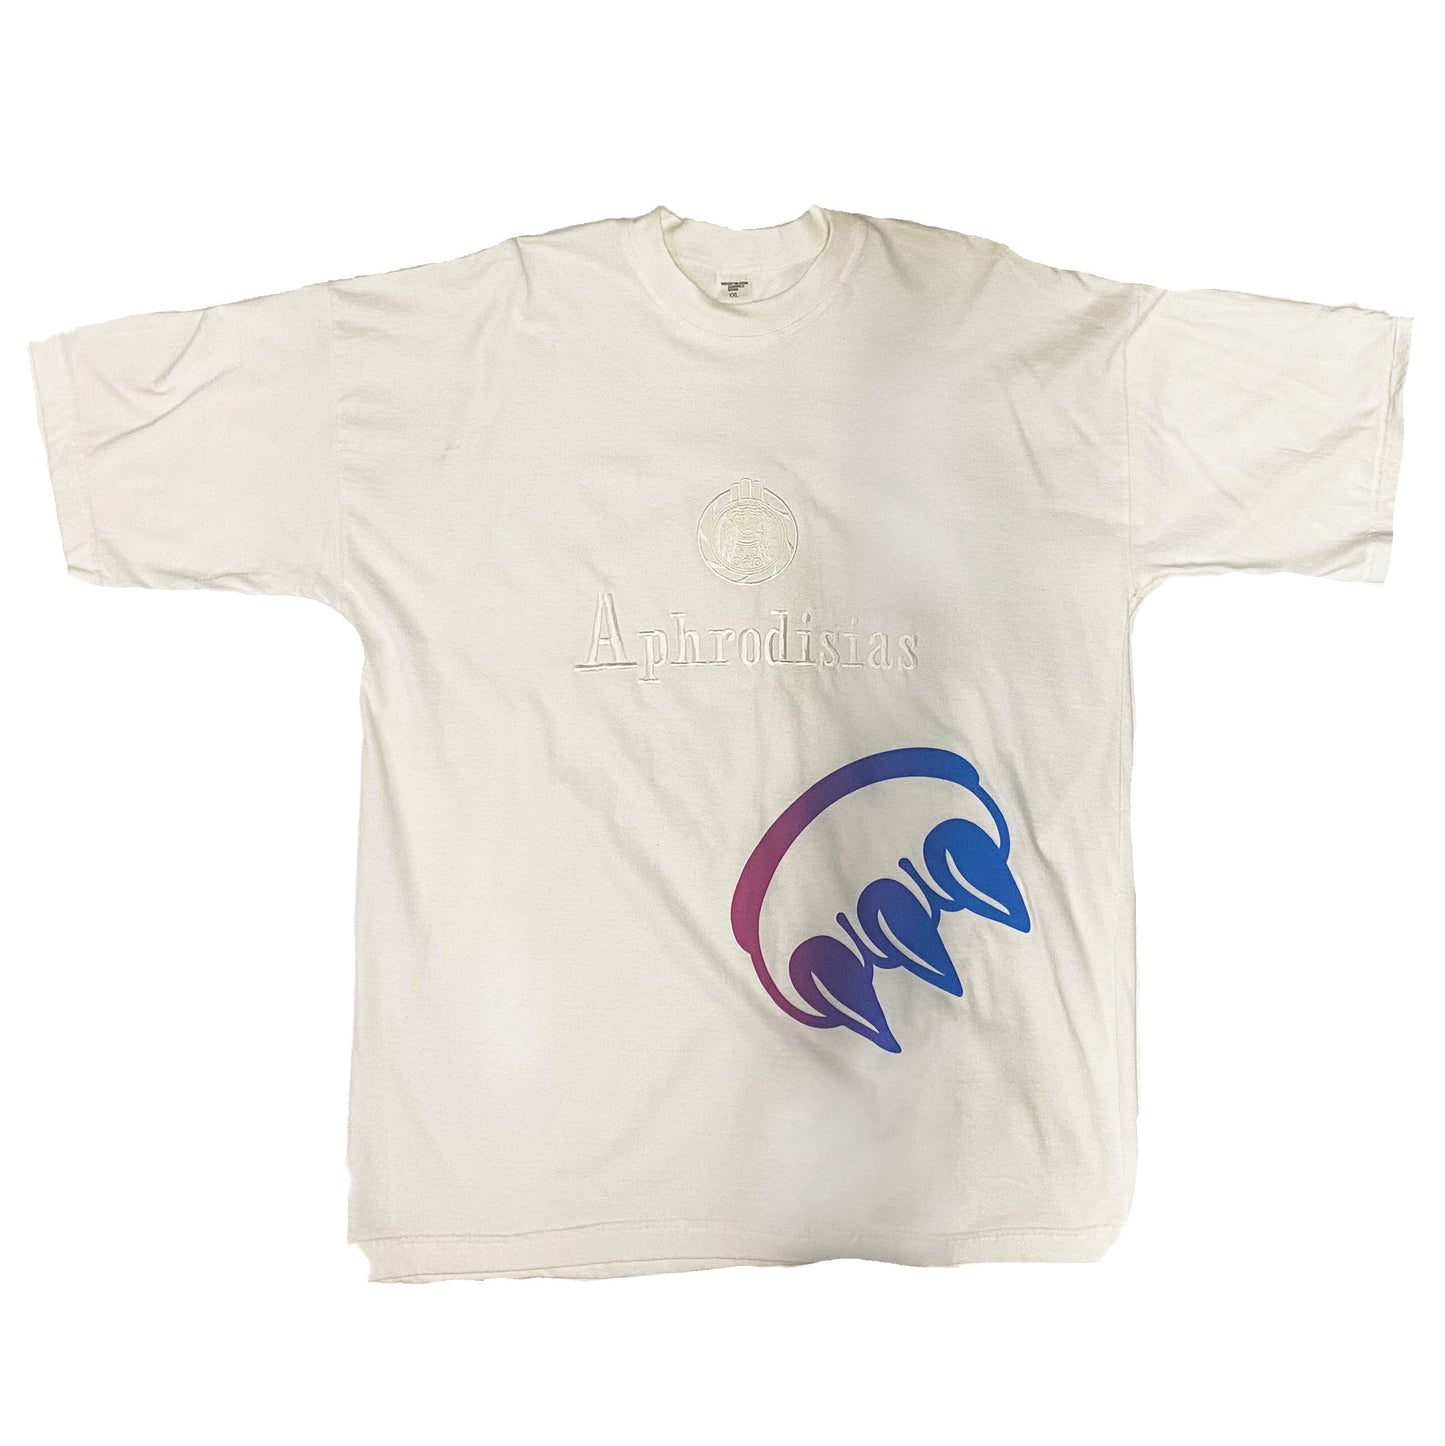 VINTAGE EMBROIDERED APHRODISIAS CLAW TEE